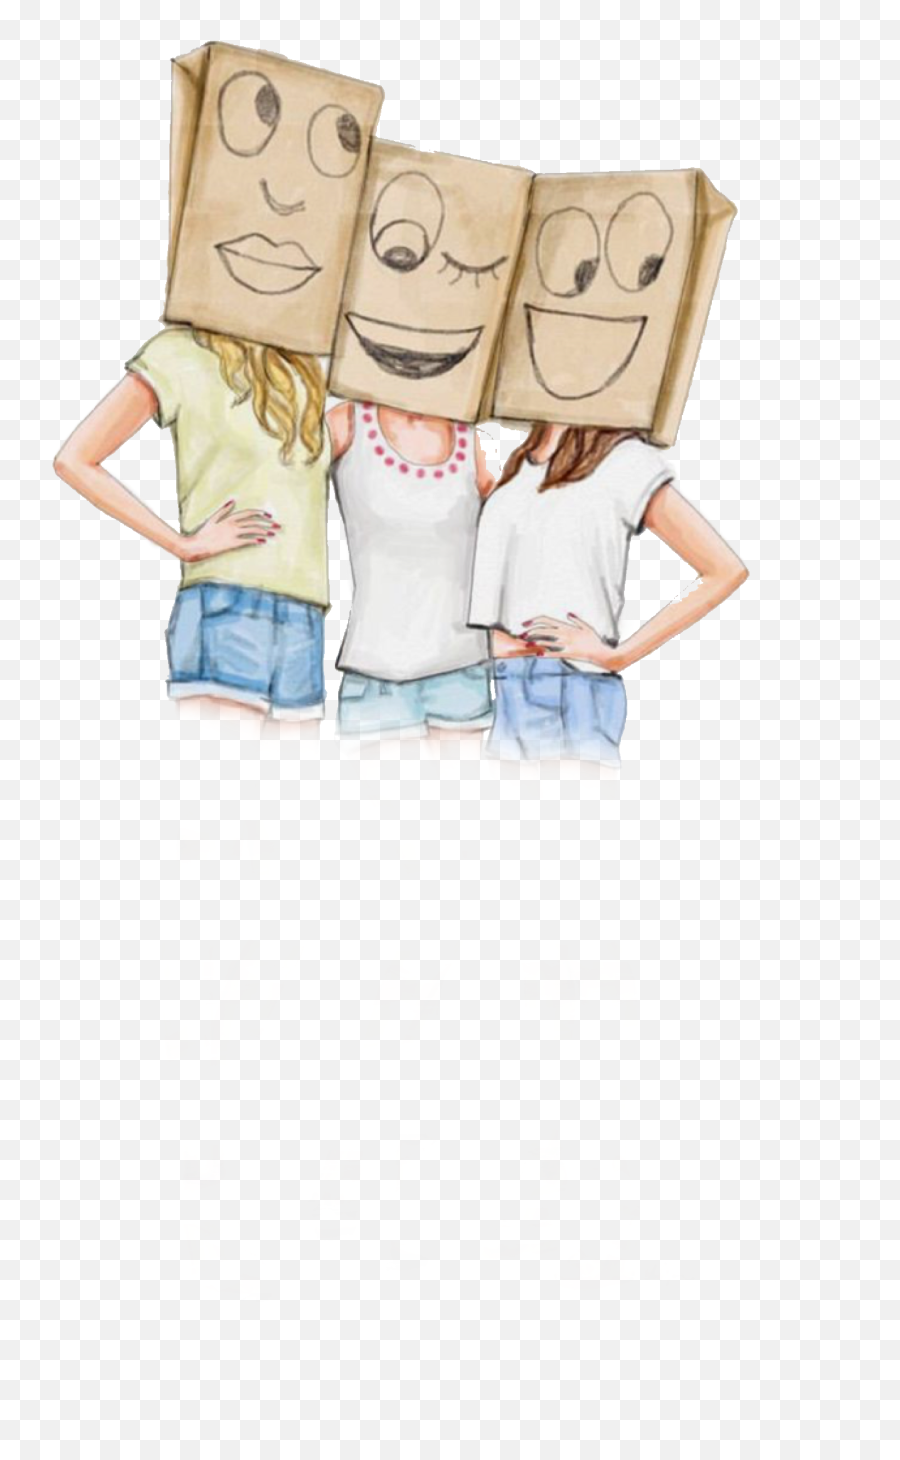 The Most Edited - Bff 3 Best Friends Drawing Emoji,Girle Emoticon